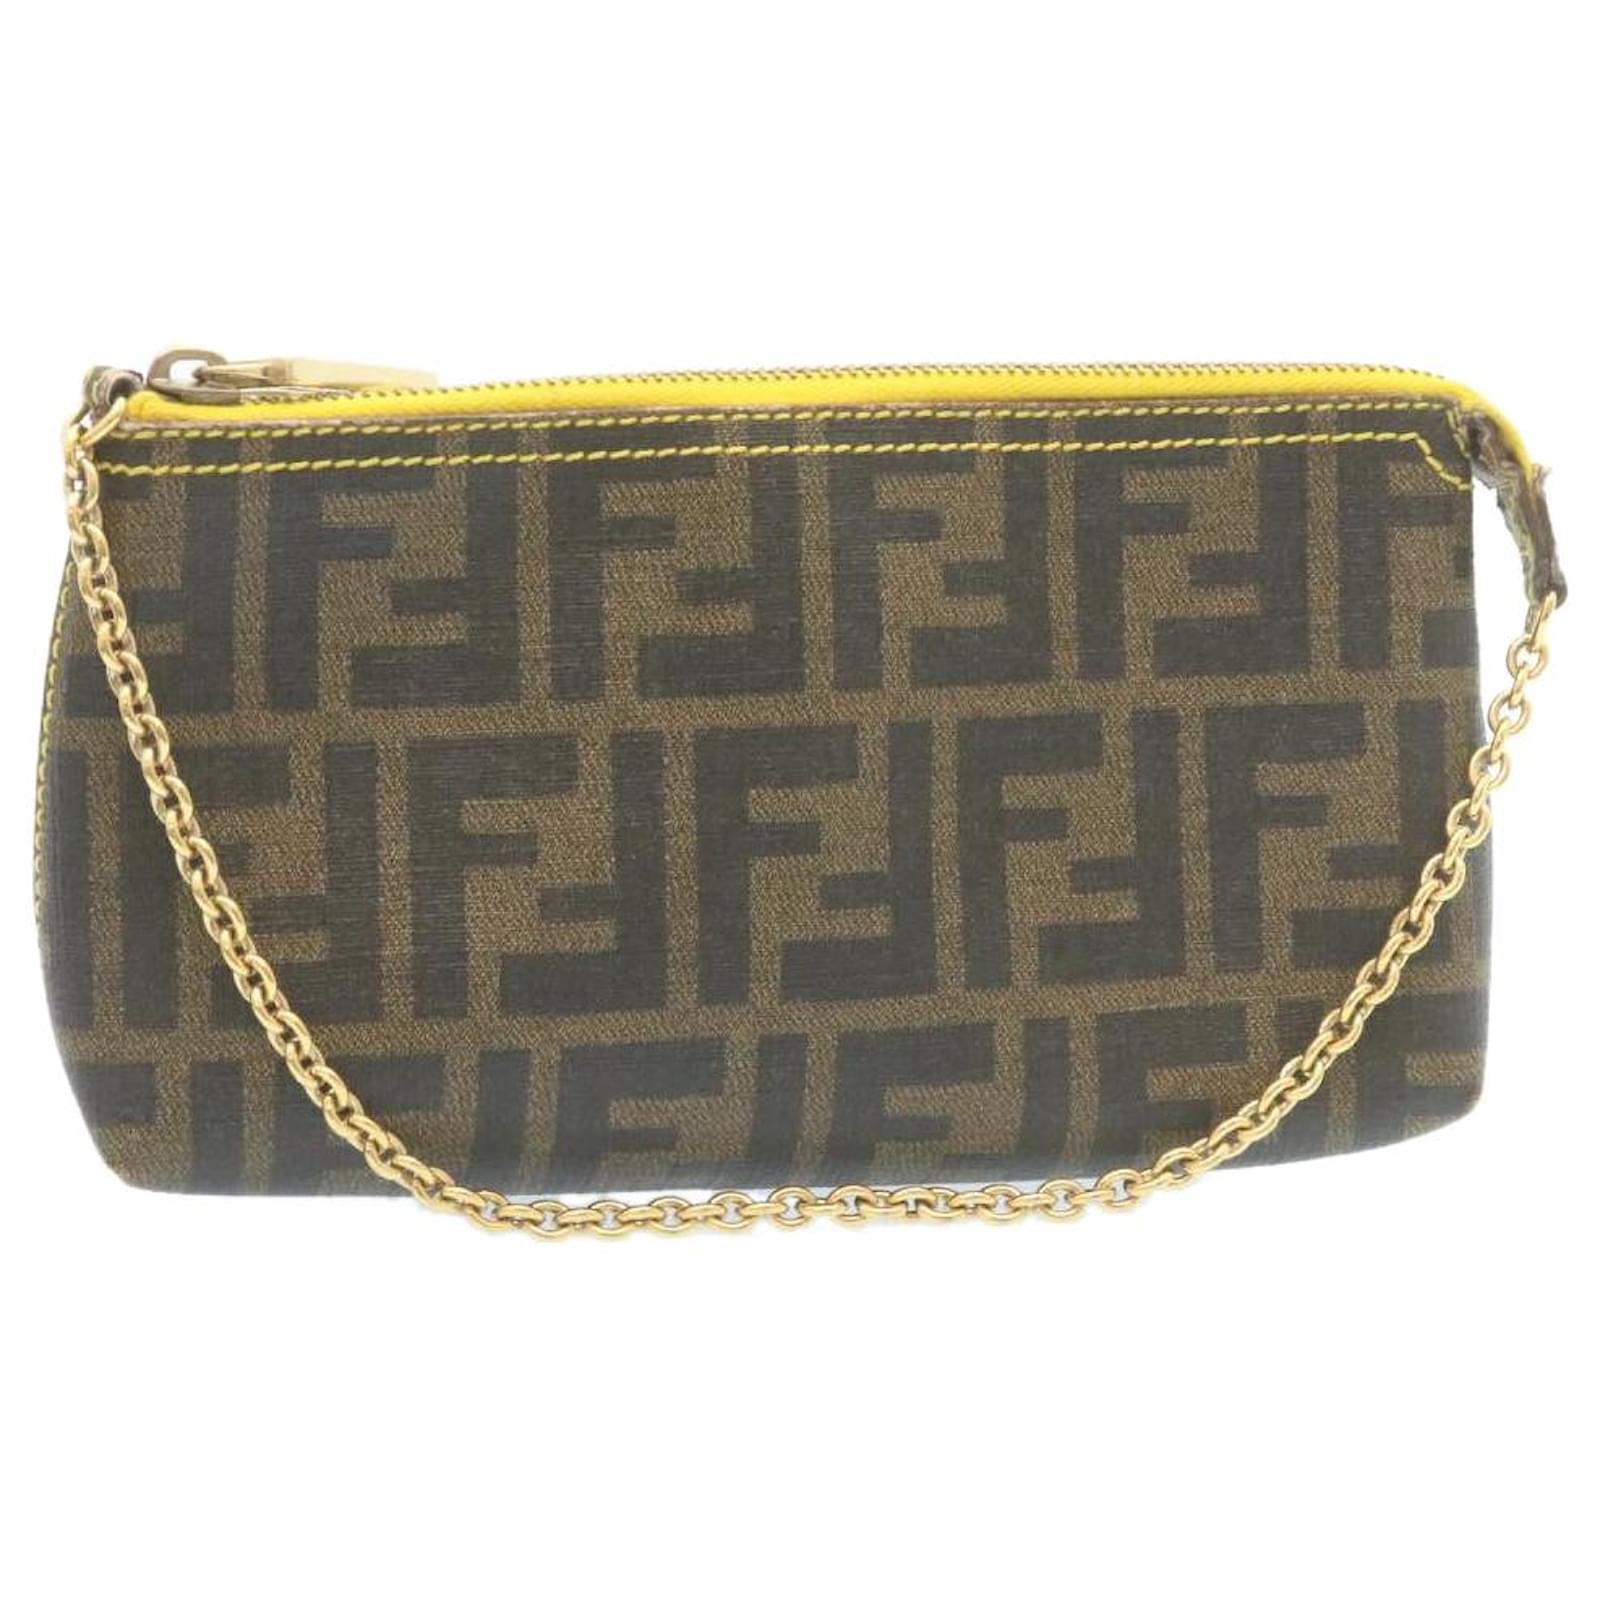 Fendi Women Wallet on Chain with Pouches Brown Leather Mini-Bag